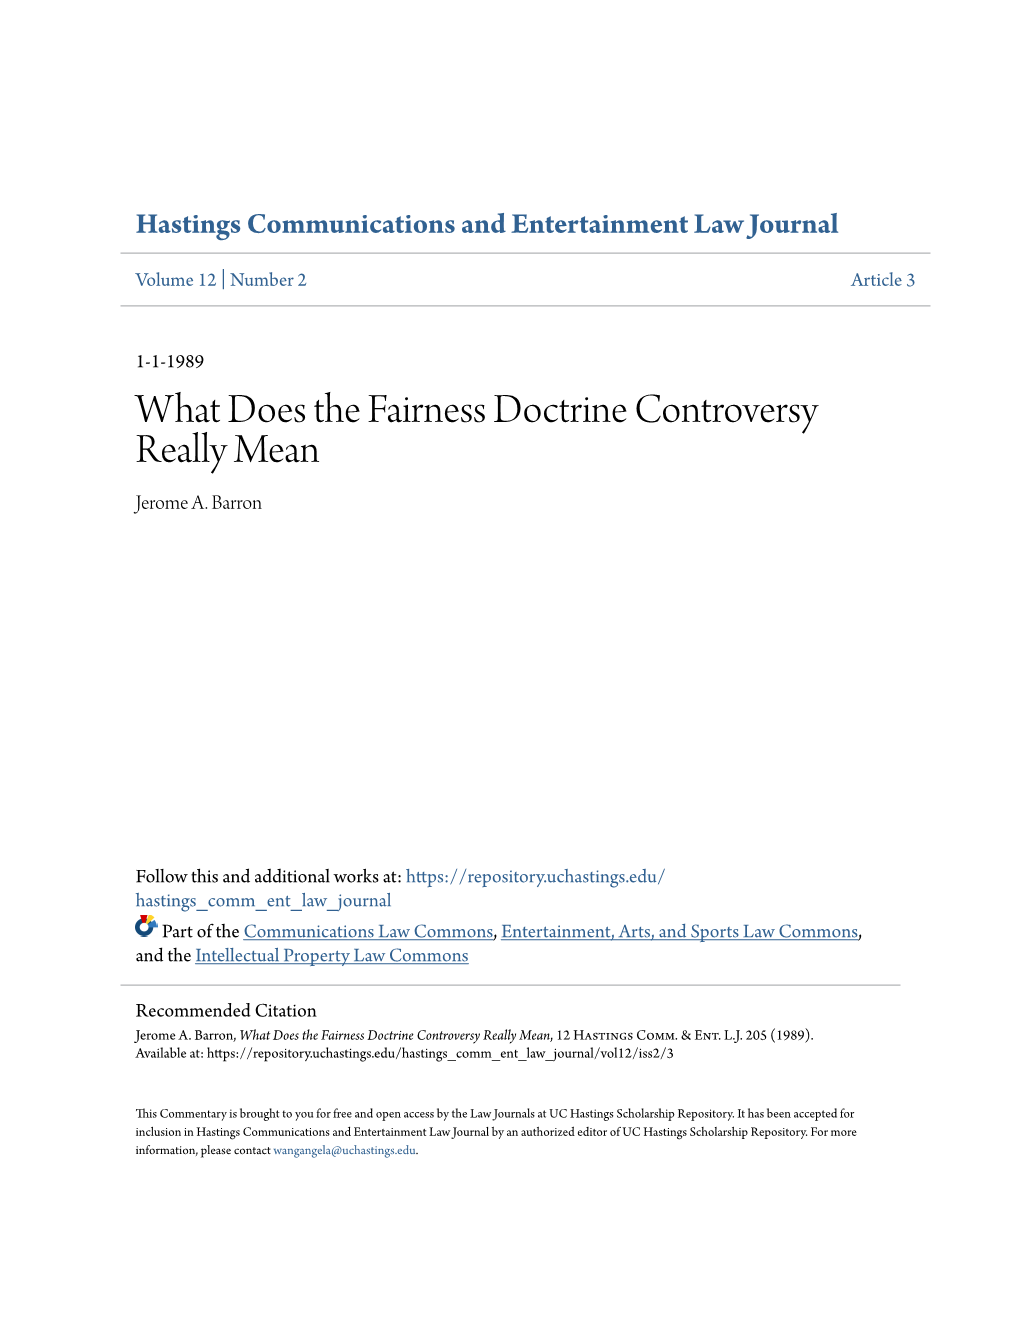 What Does the Fairness Doctrine Controversy Really Mean Jerome A